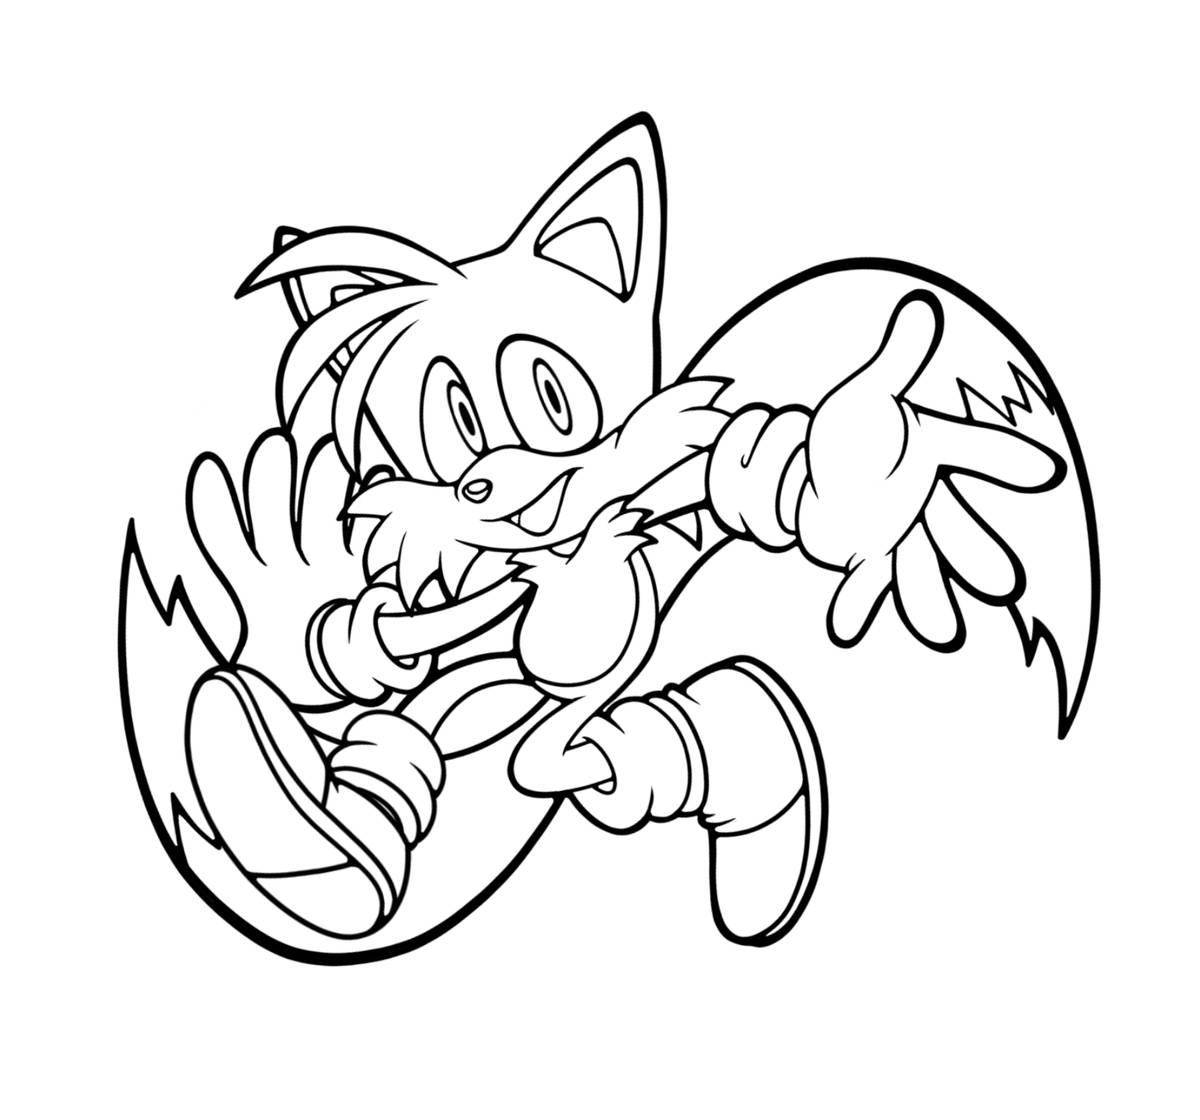 Charming sonic movie 2 coloring book